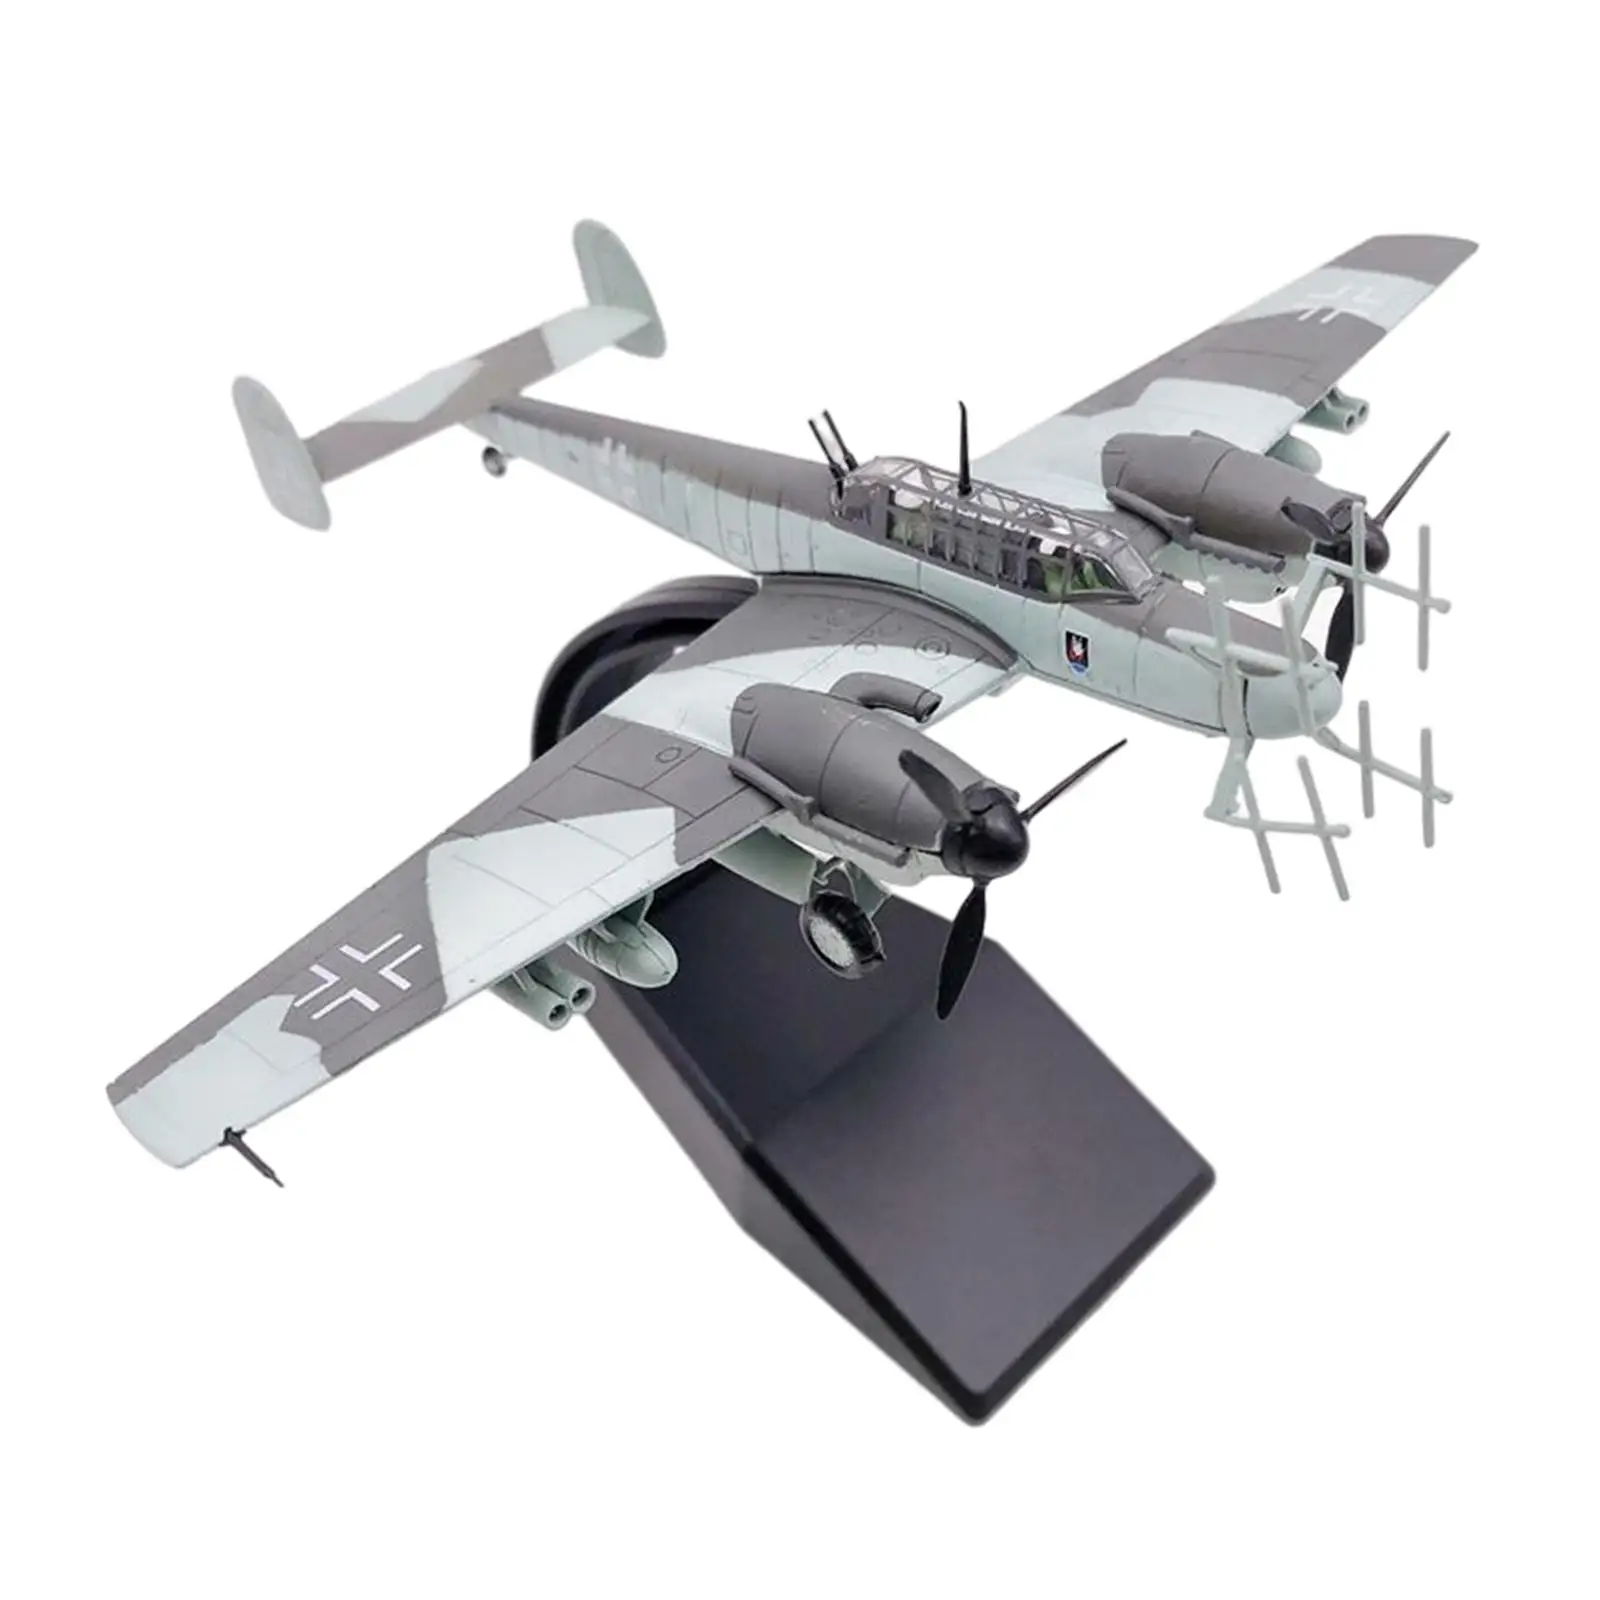 110 Aircraft Model Simulation Ornament 110 Fighter Model for Table Decor